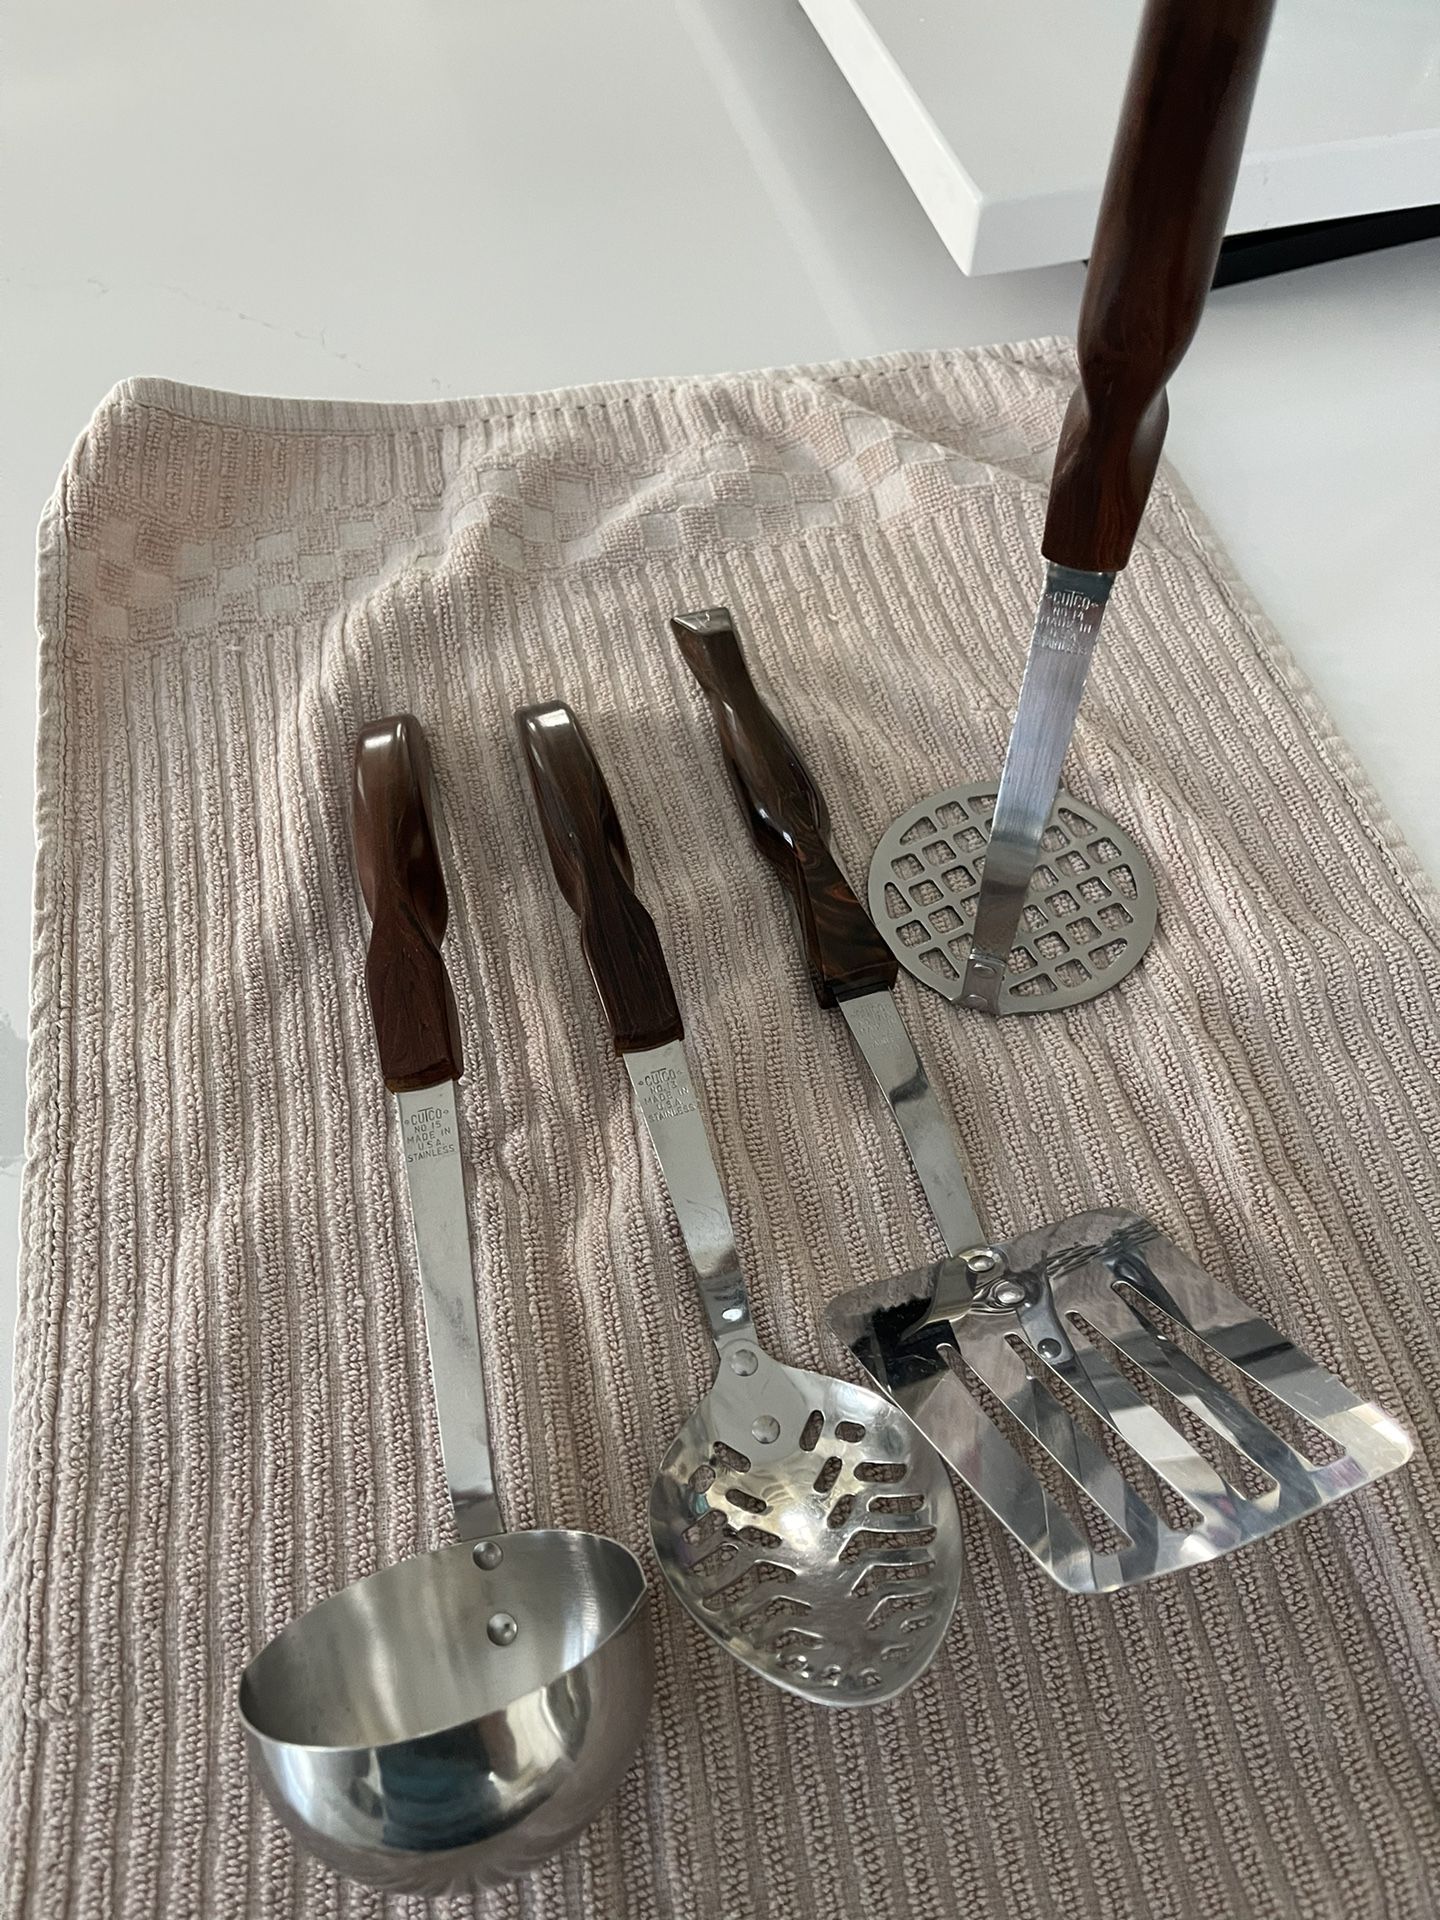 Slotted Turner | Kitchen Utensils by Cutco